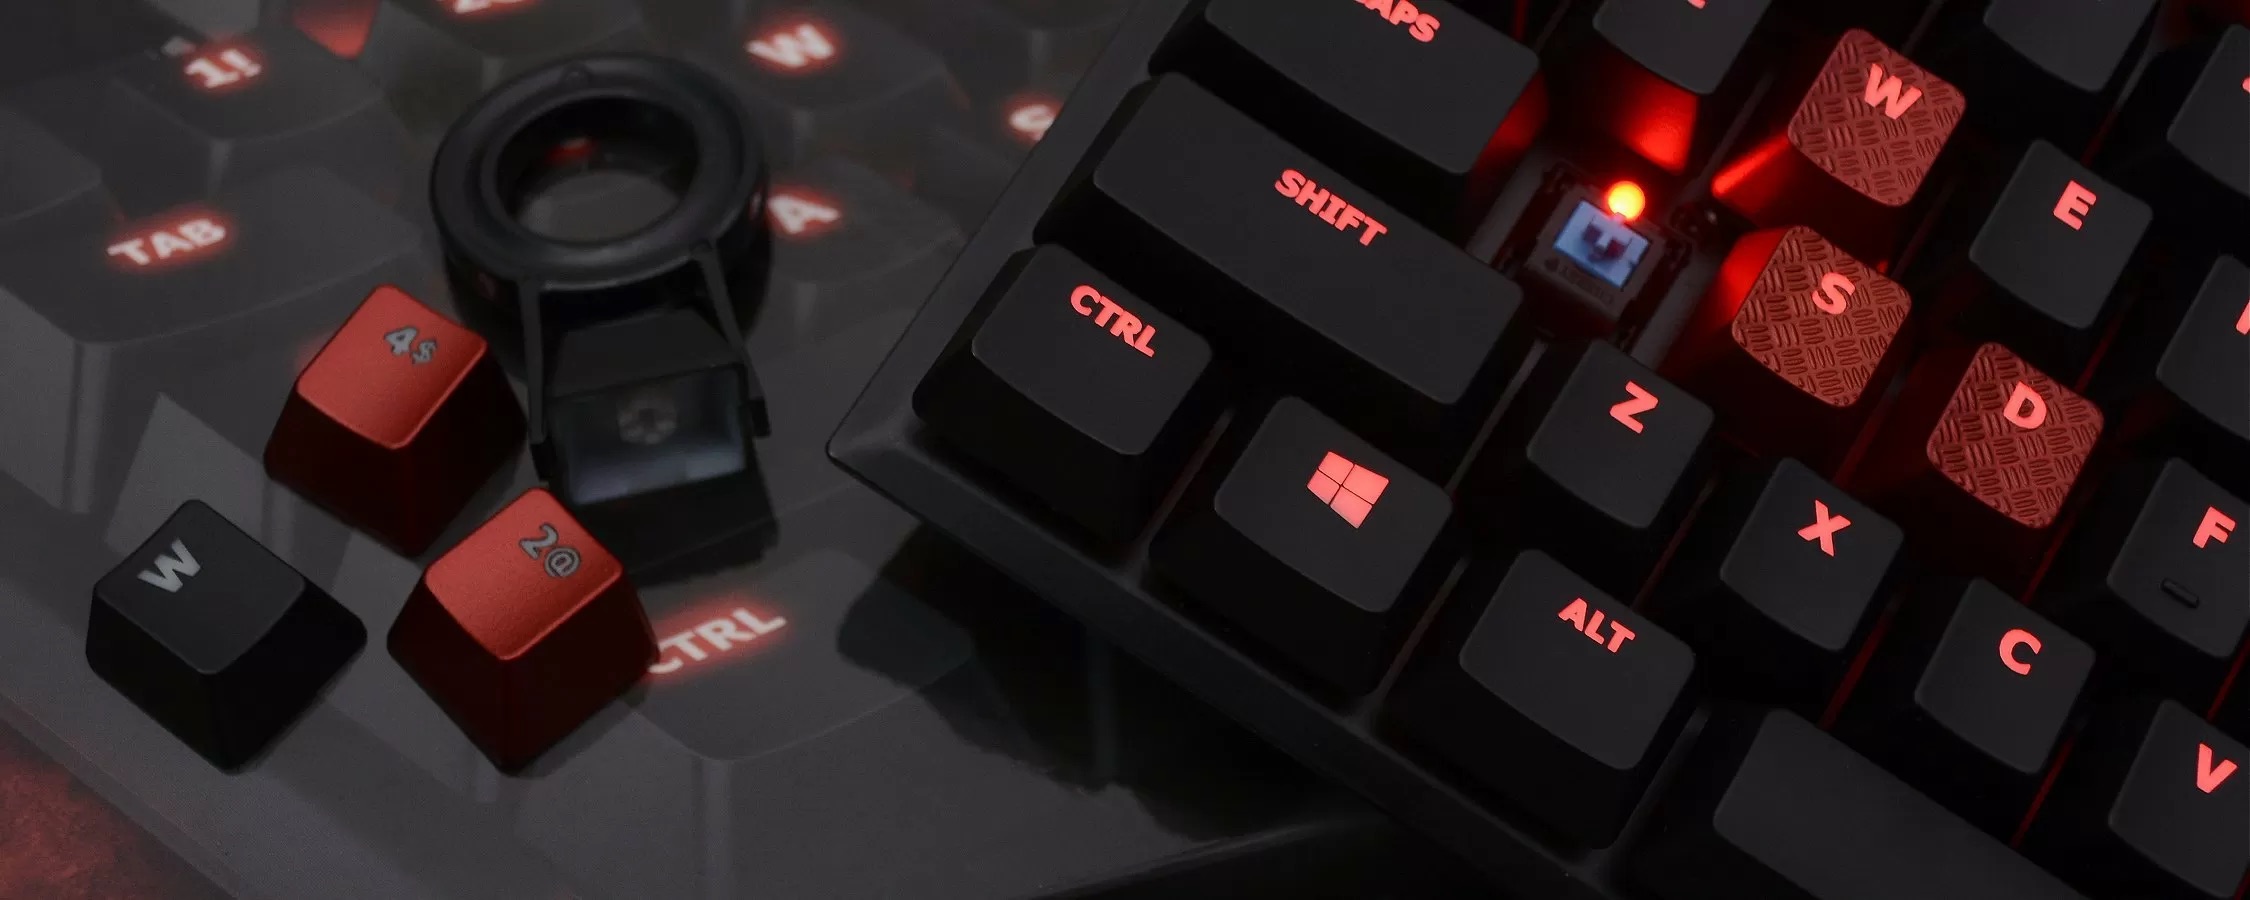 HyperX Alloy FPS Mechanical Gaming Keyboard: How To Turn On Game Mode